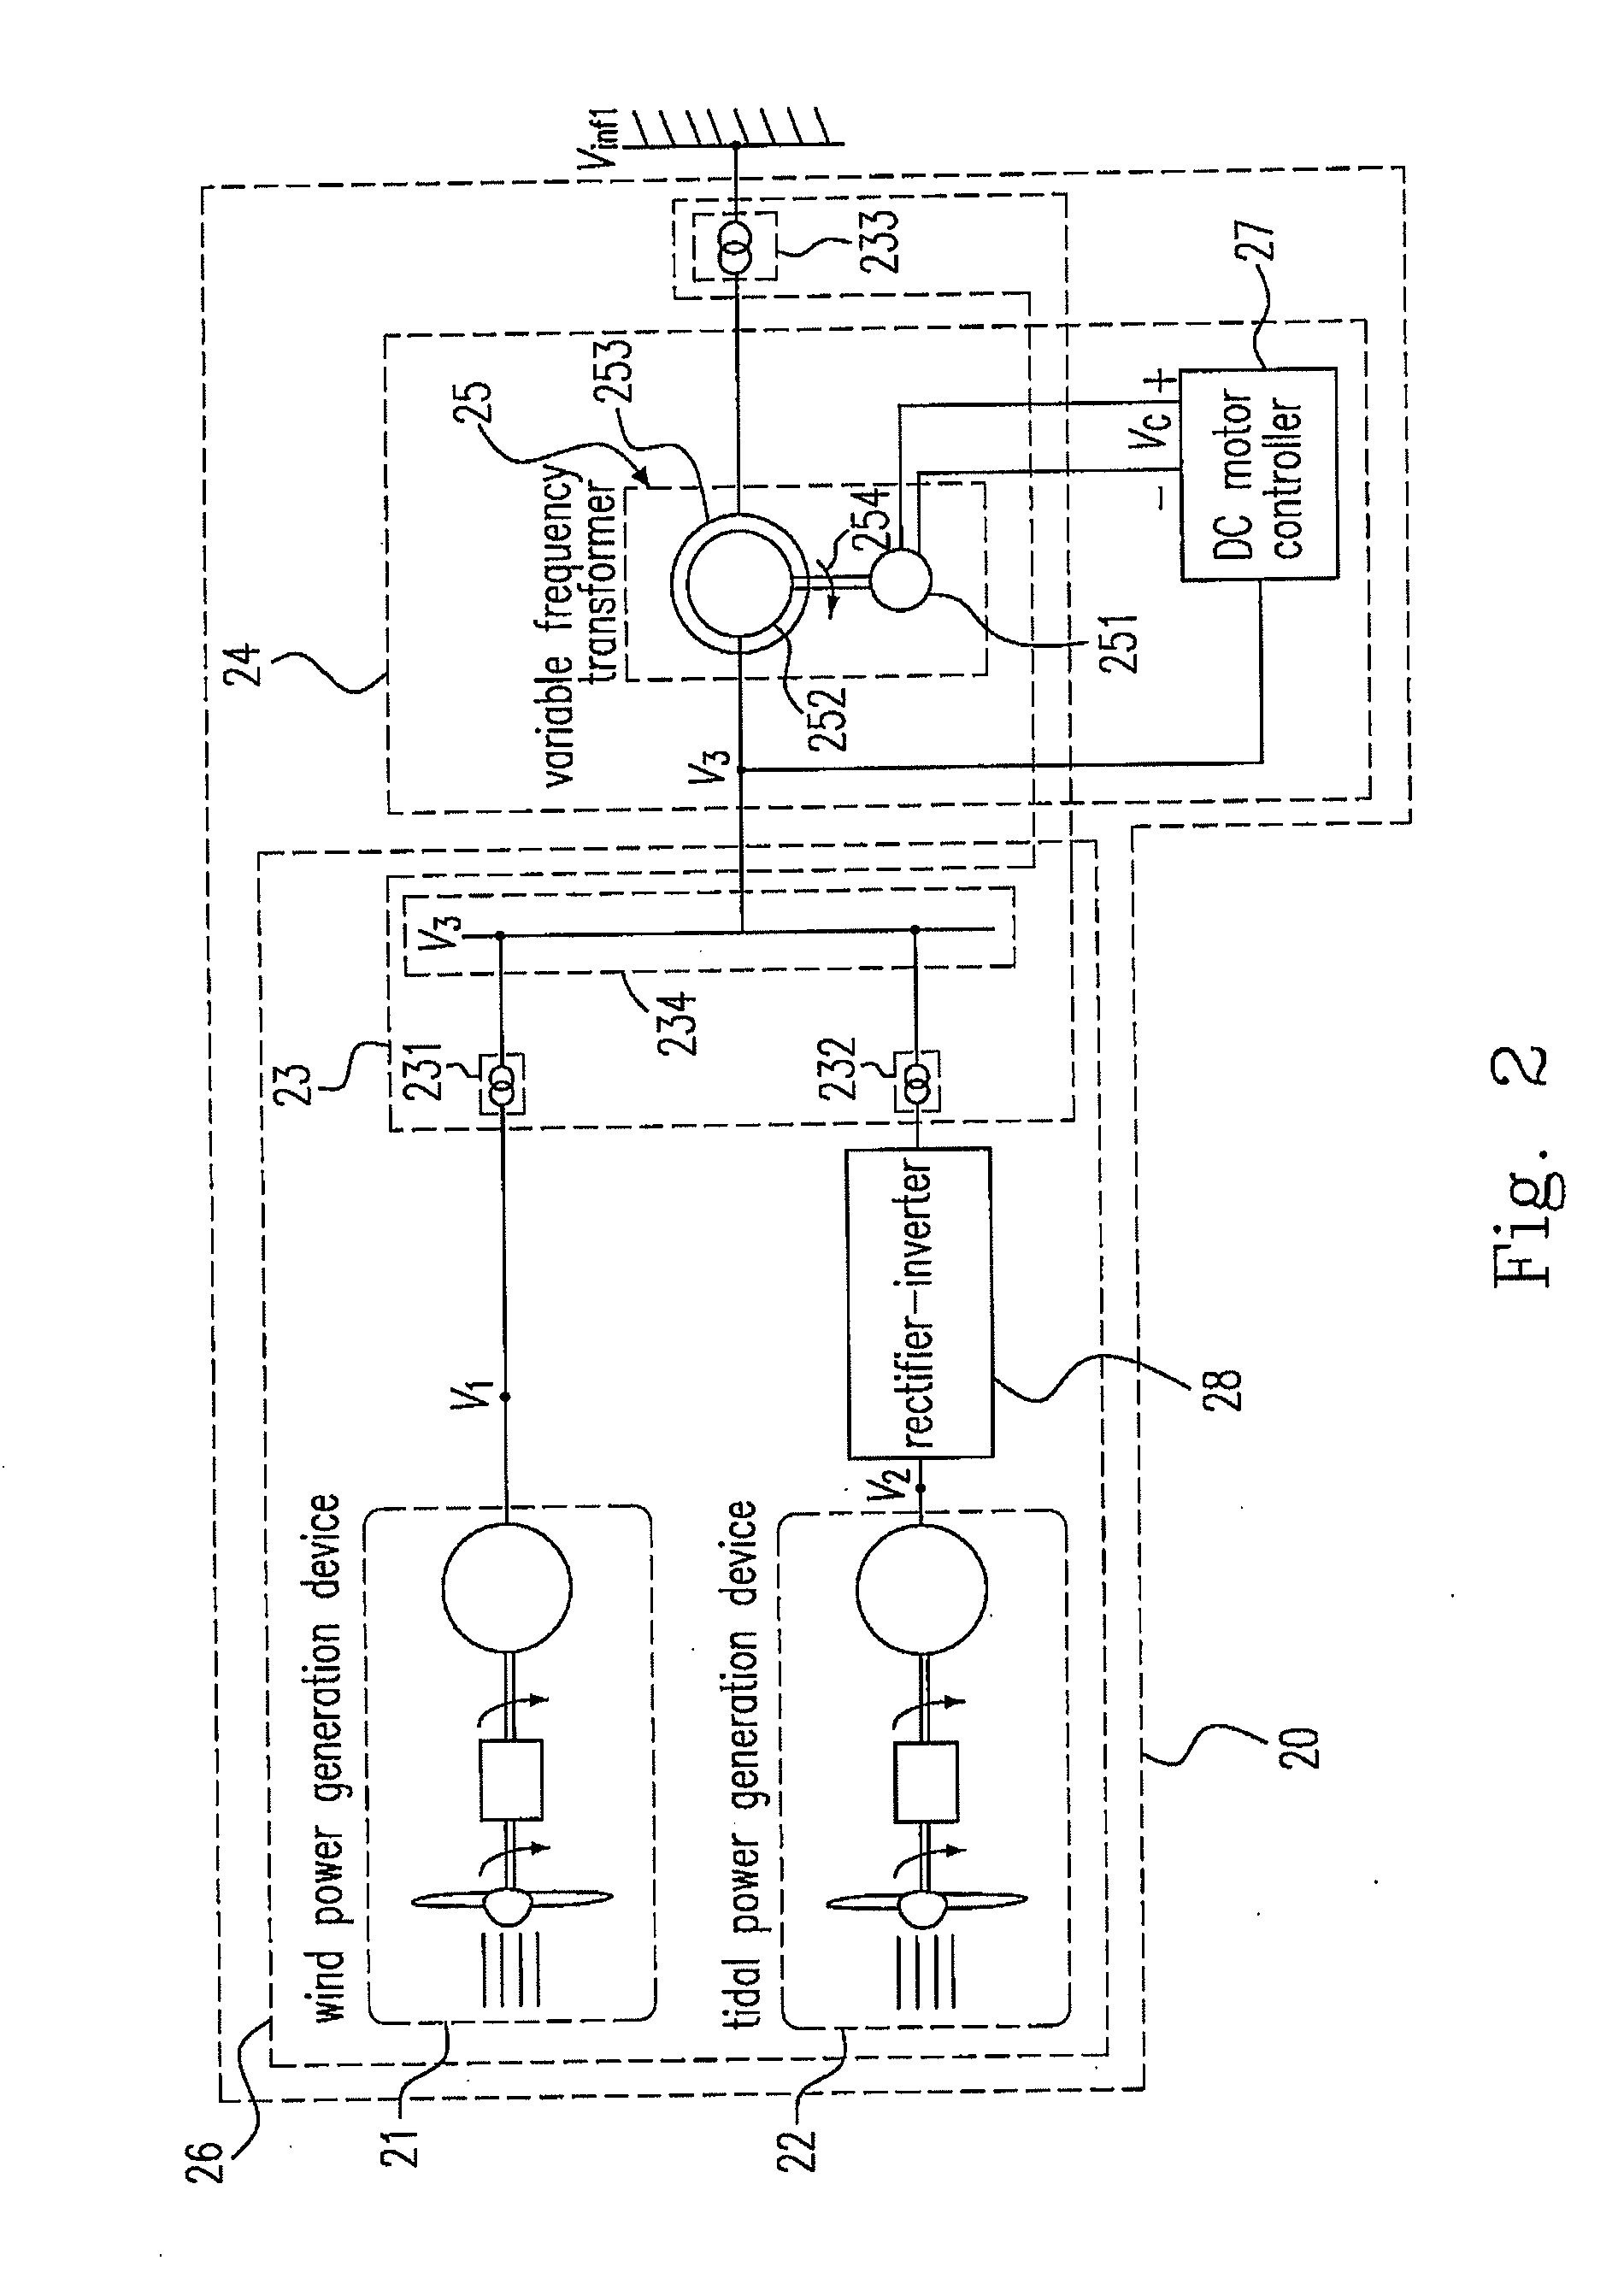 System and method of integrating wind power and tidal energy